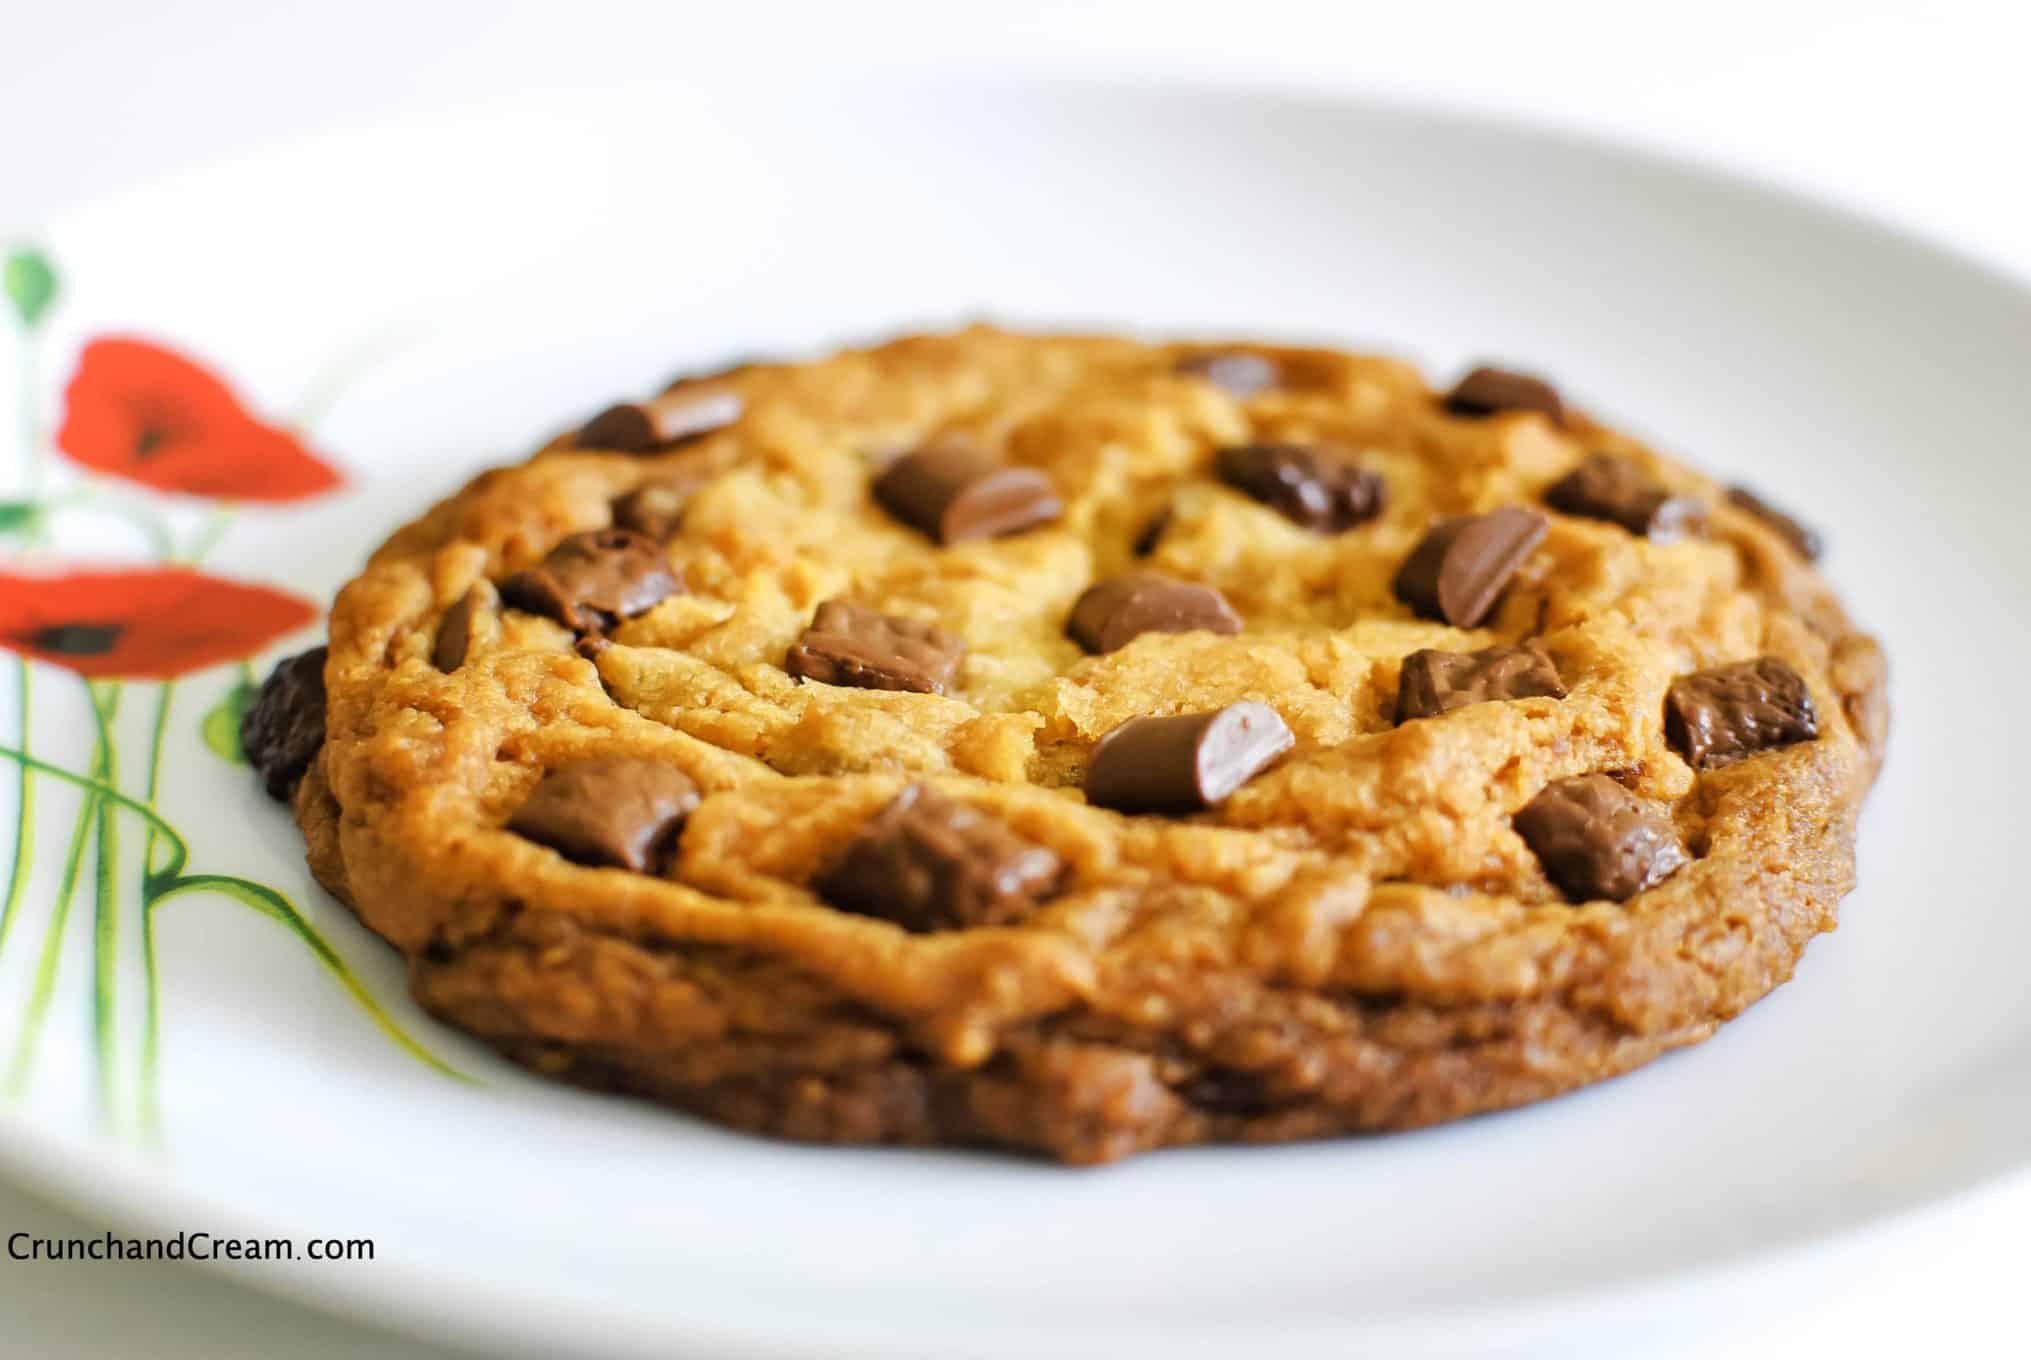 https://www.crunchandcream.com/wp-content/uploads/2019/05/single-serving-chocolate-chip-cookie-2-scaled.jpg